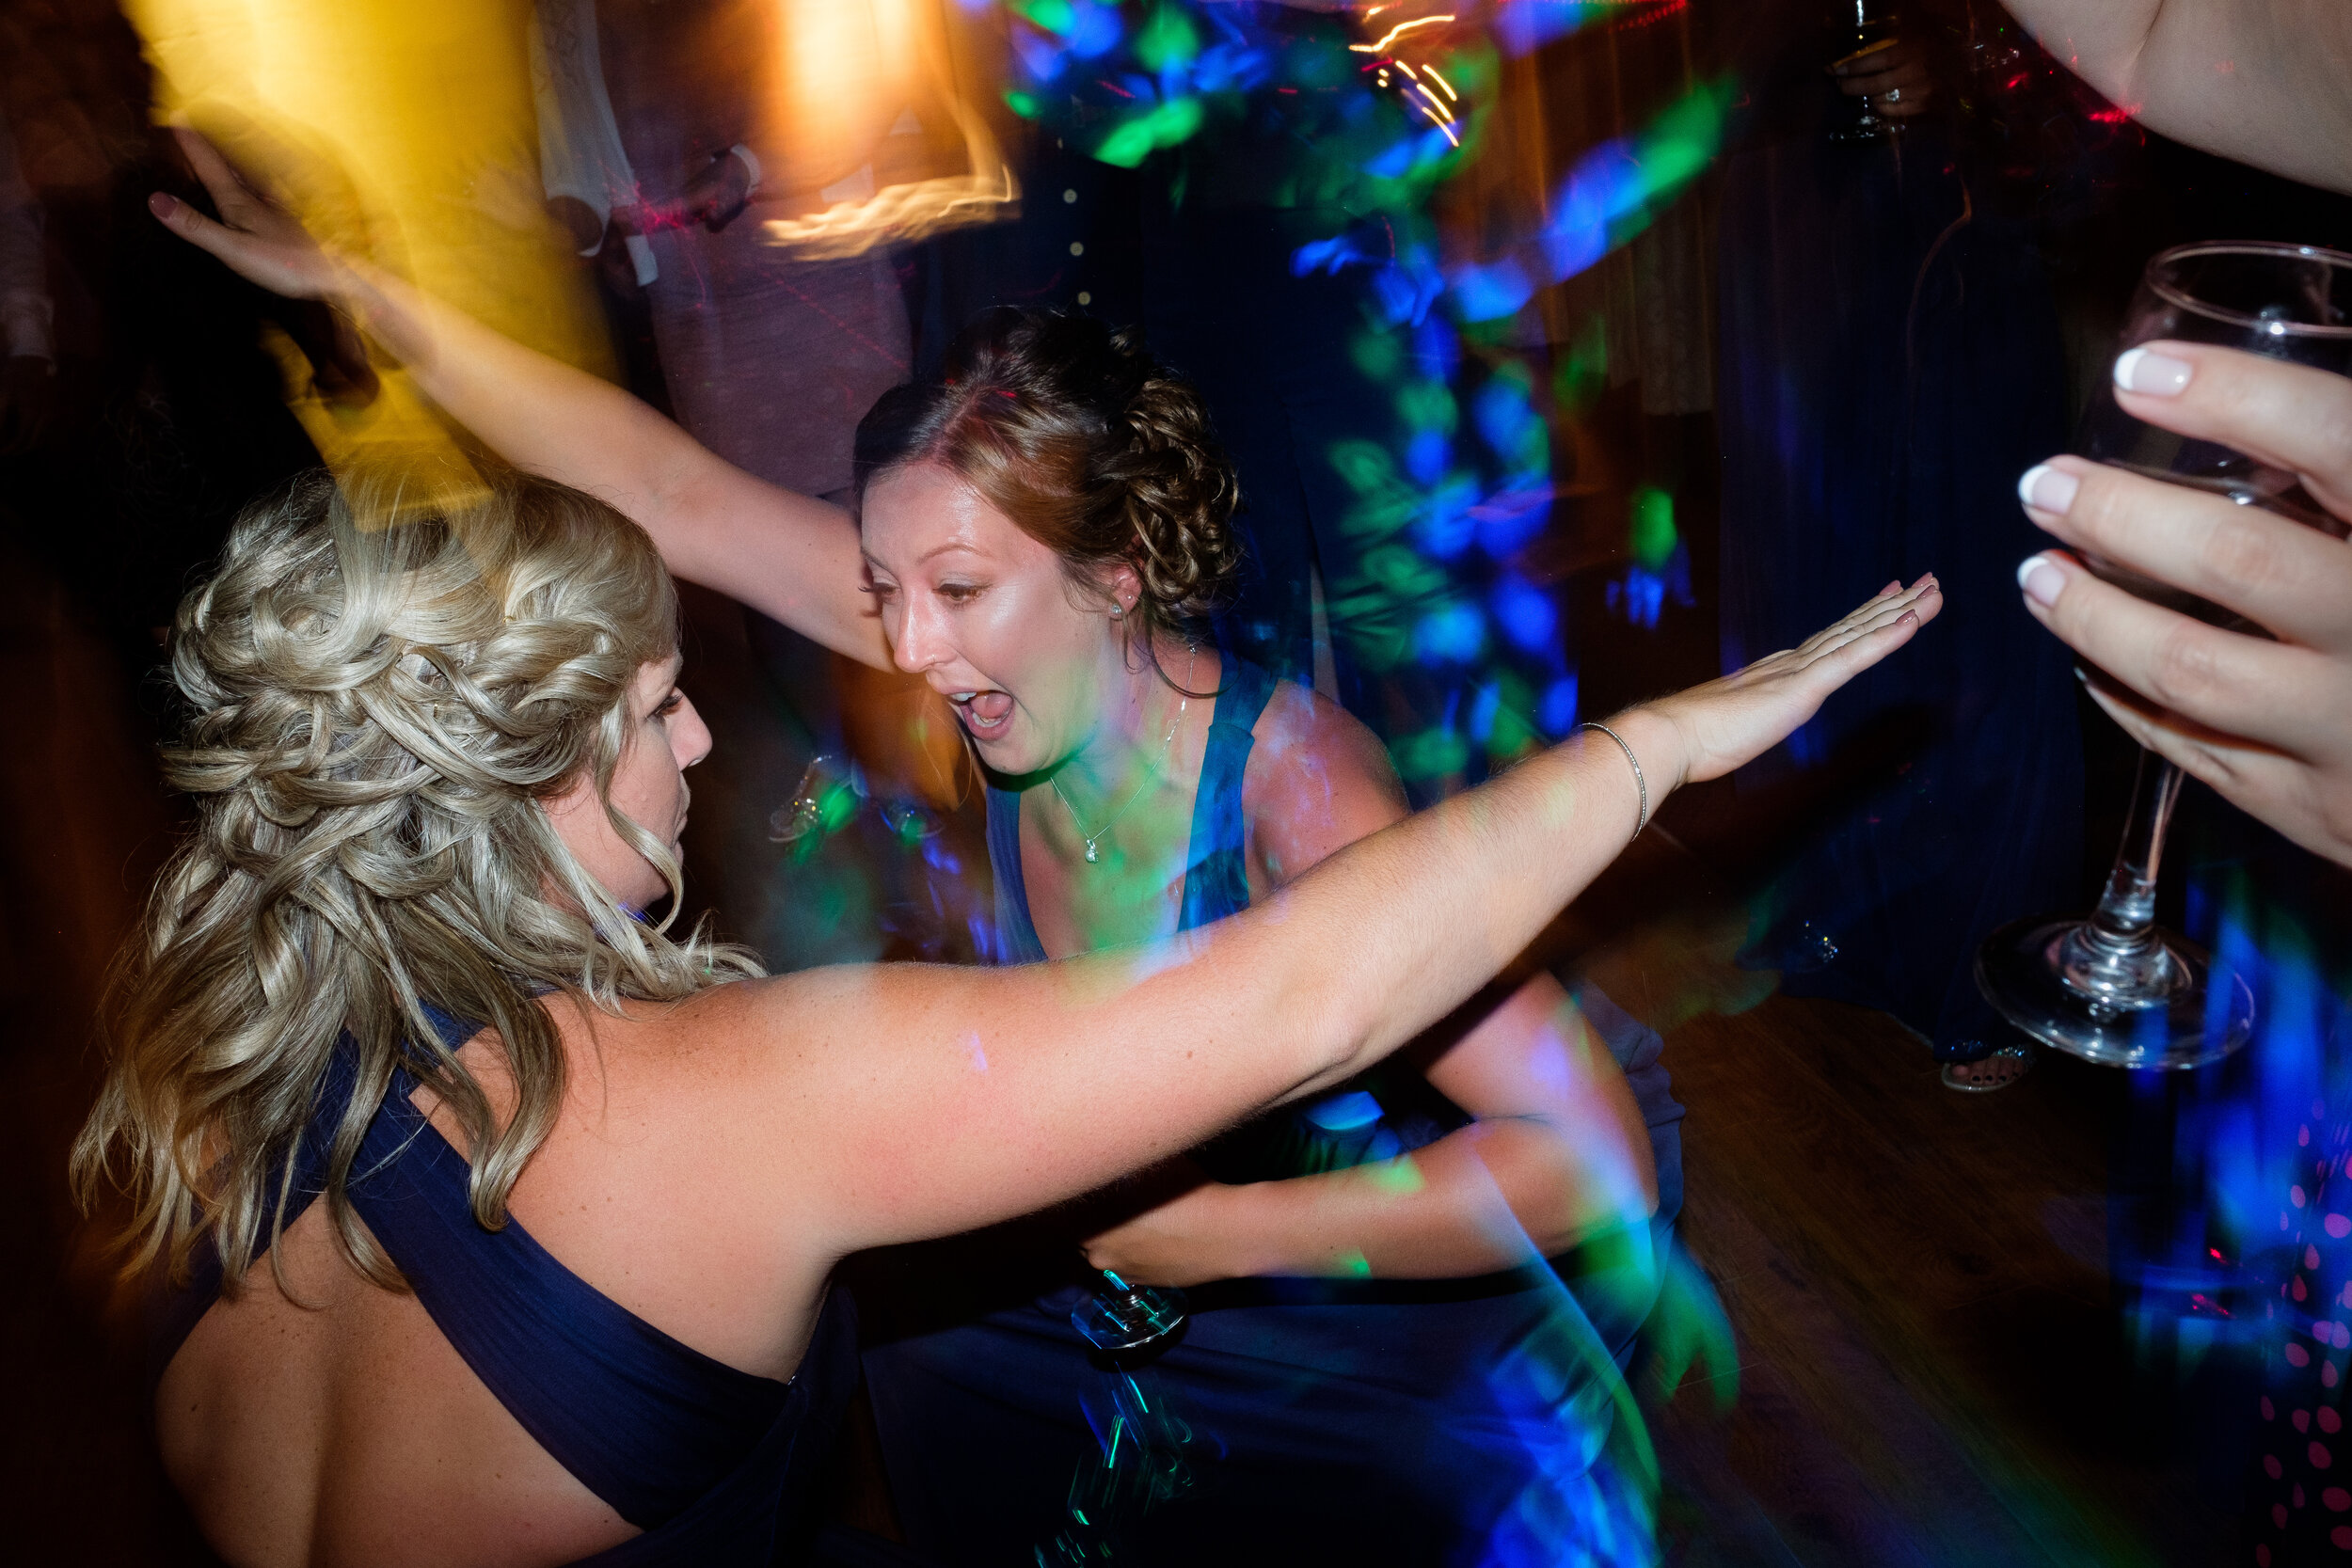  guests enjoy the dance floor during Amanda + Chad’s wedding reception at the Hessenland Country Inn by Toronto wedding photographer Scott Williams 